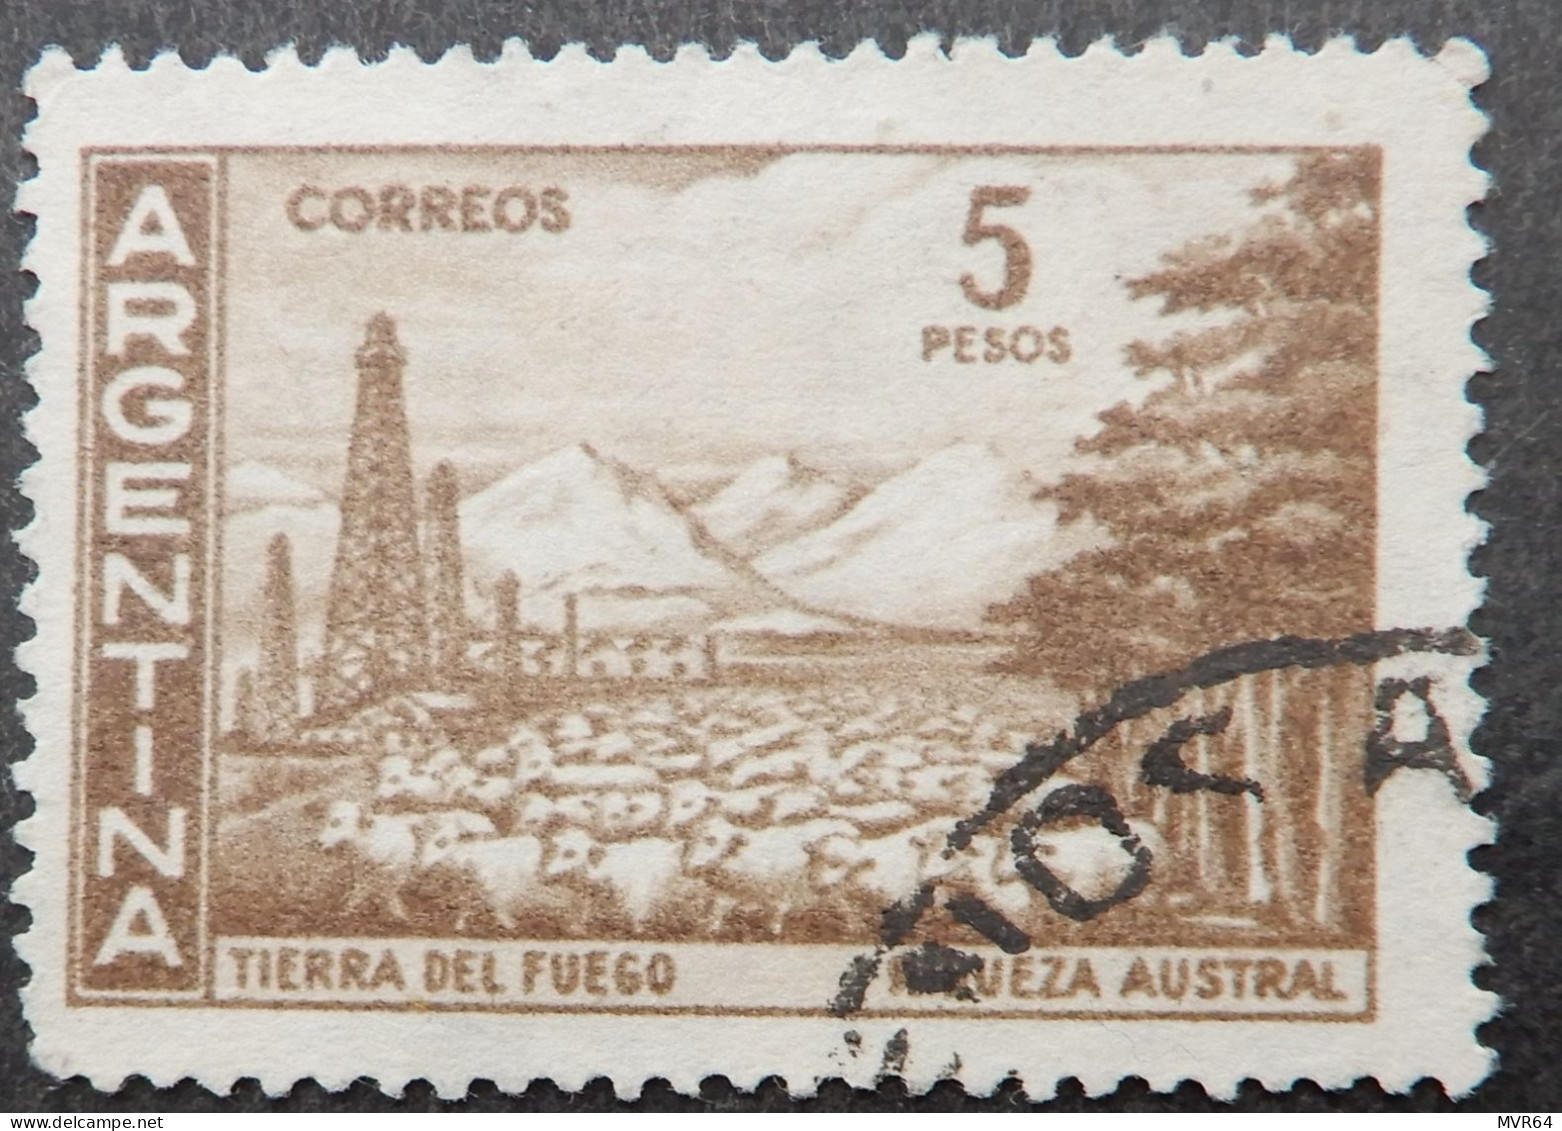 Argentinië Argentinia 1959 1960 (2) Country Views - Used Stamps